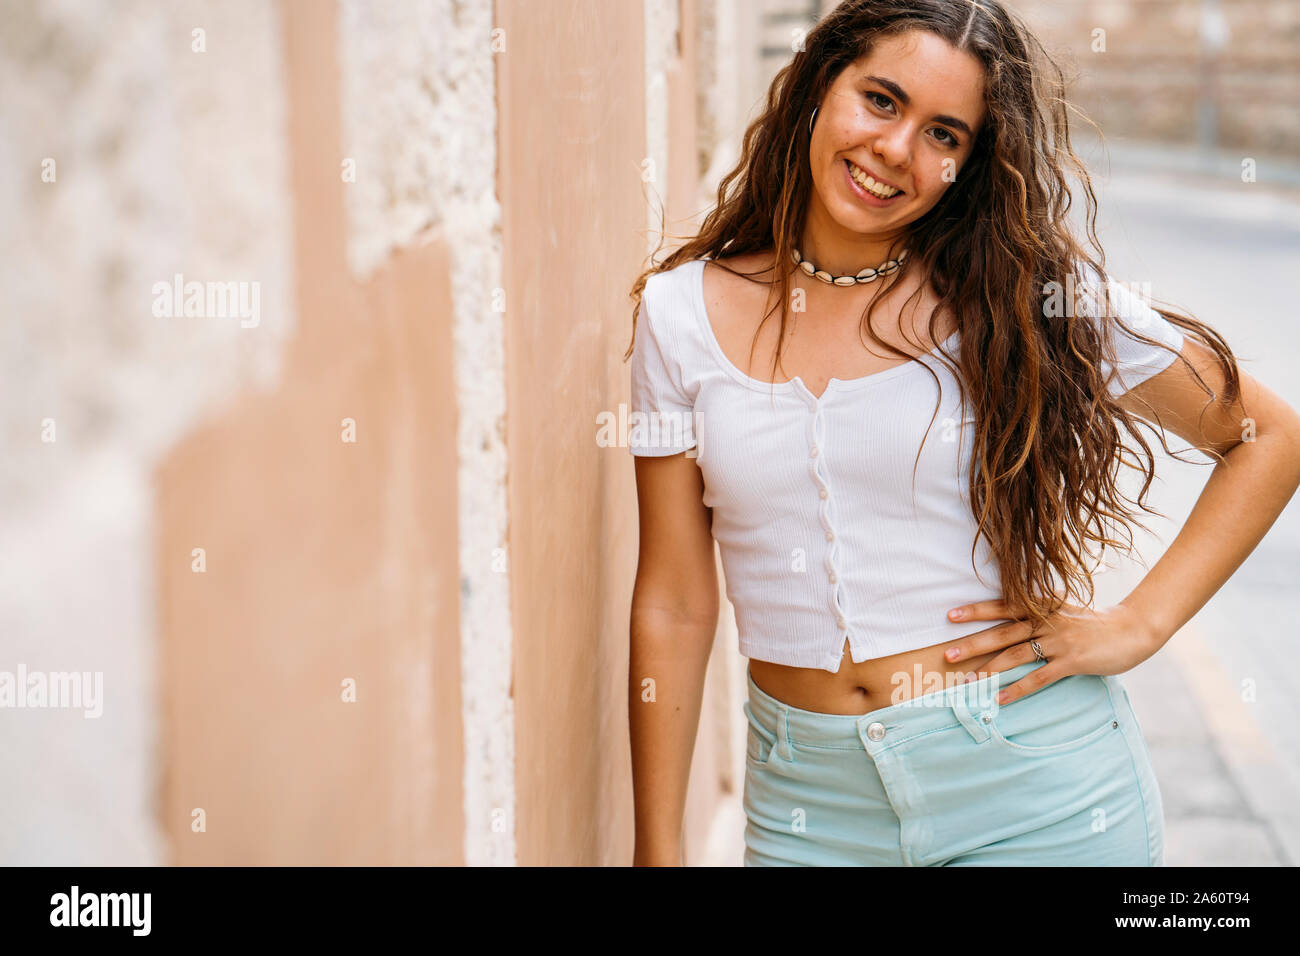 Portrait of beautiful young woman at a wall Stock Photo